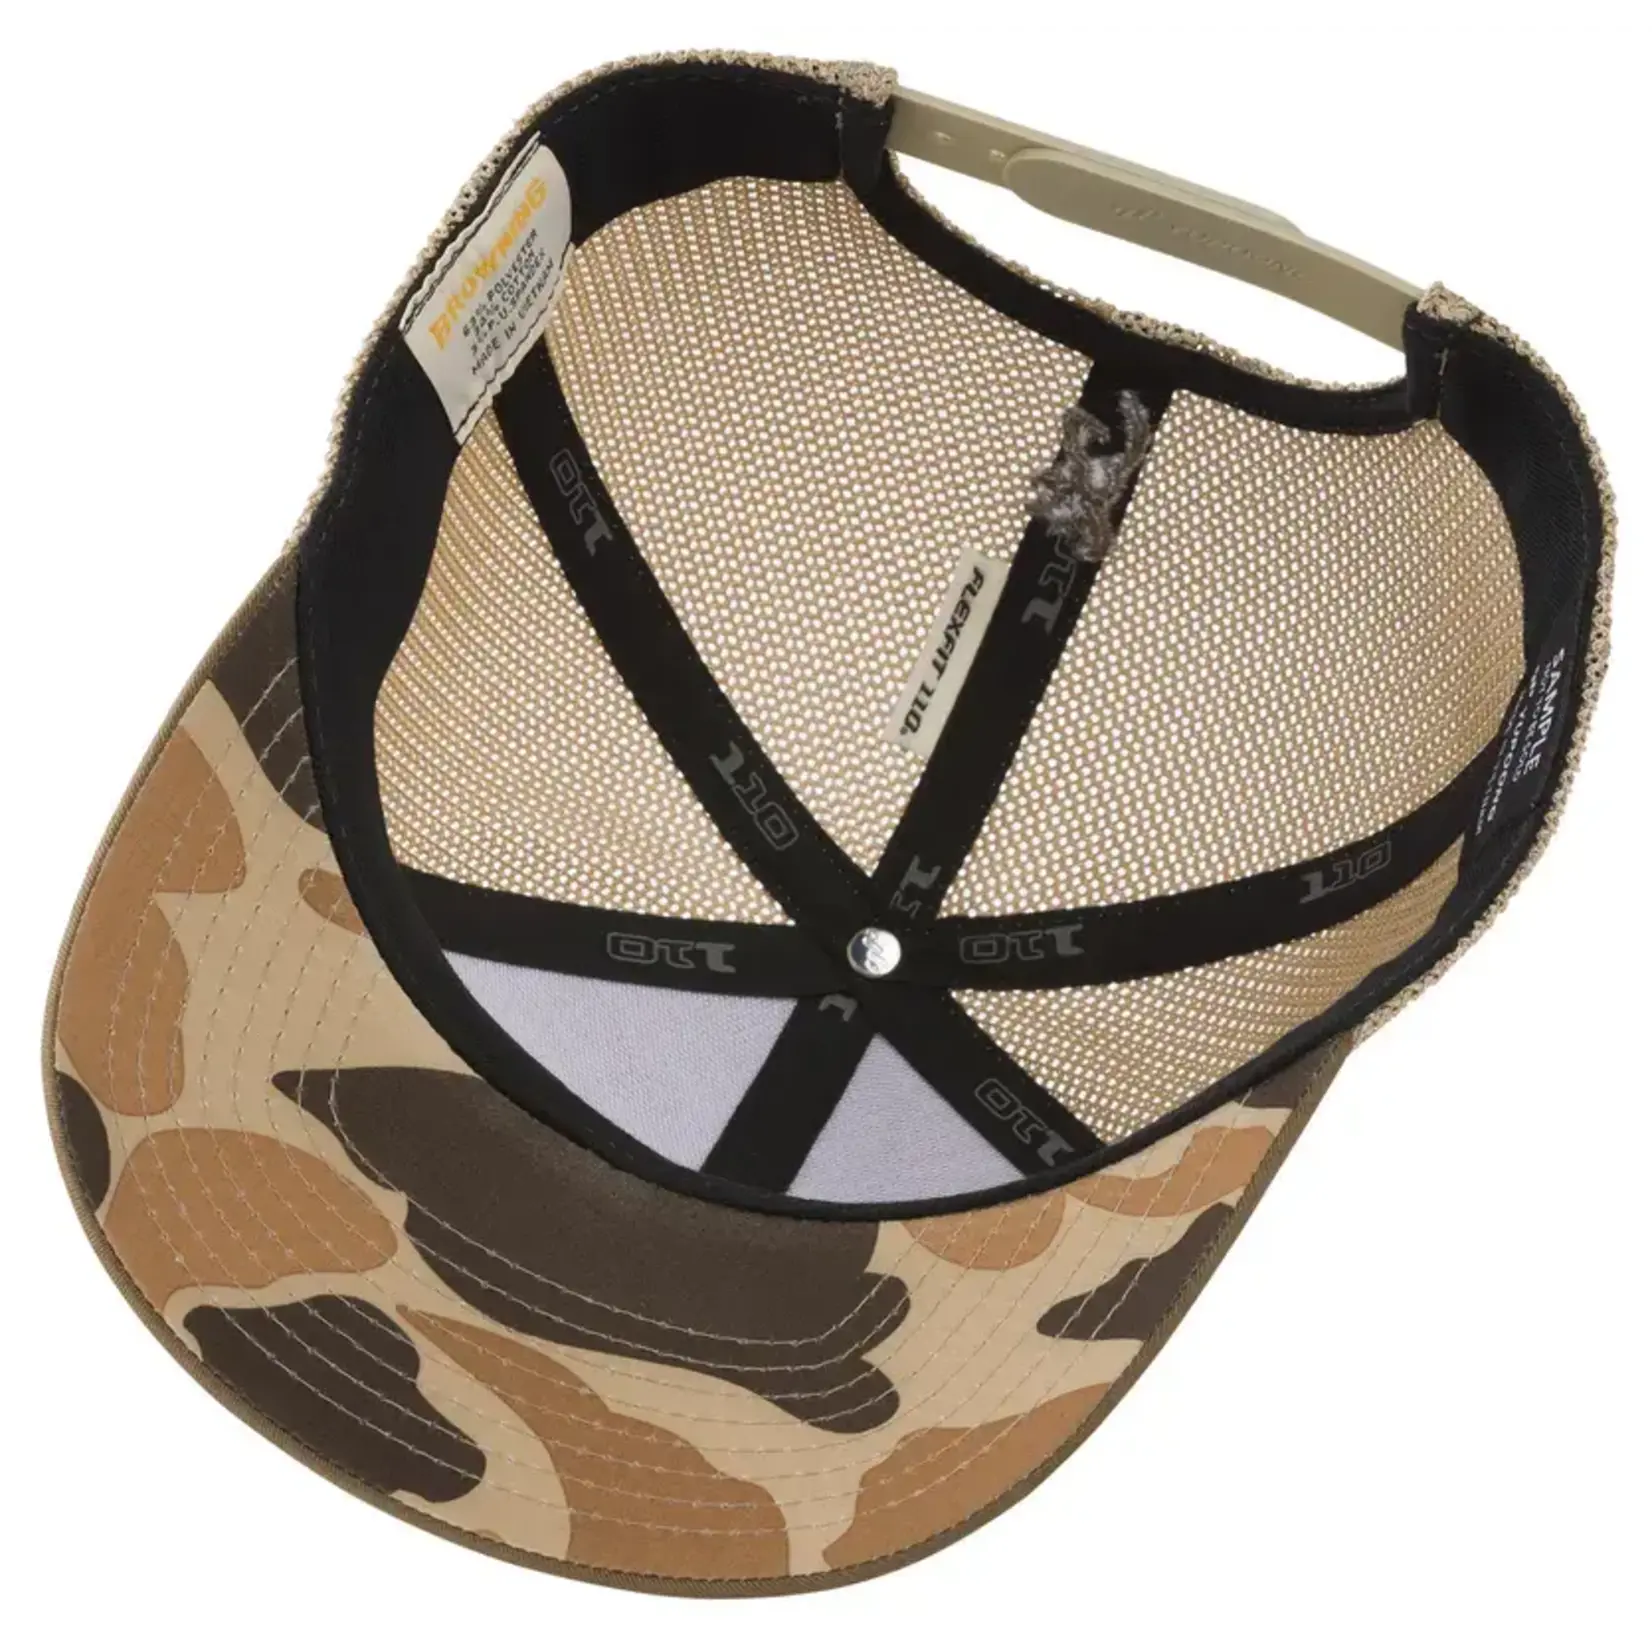 BROWNING Casquette Browning Cypress Marron Avec Camouflage Browning Auric